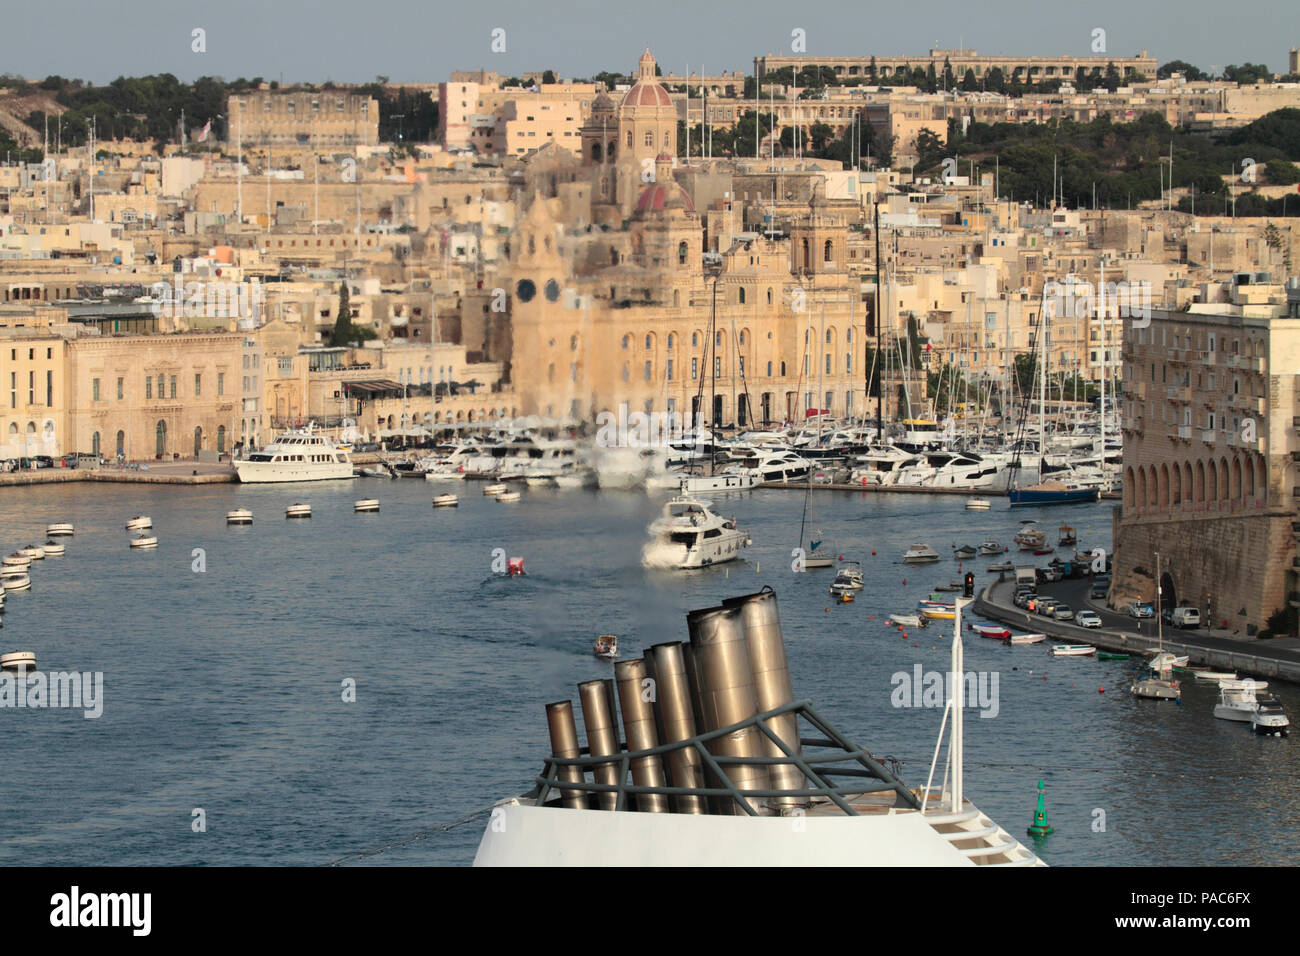 Clean exhaust from the smokestack of a cruise ship visible against the background of Birgu in Malta. Carbon emissions from ships and global warming. Stock Photo